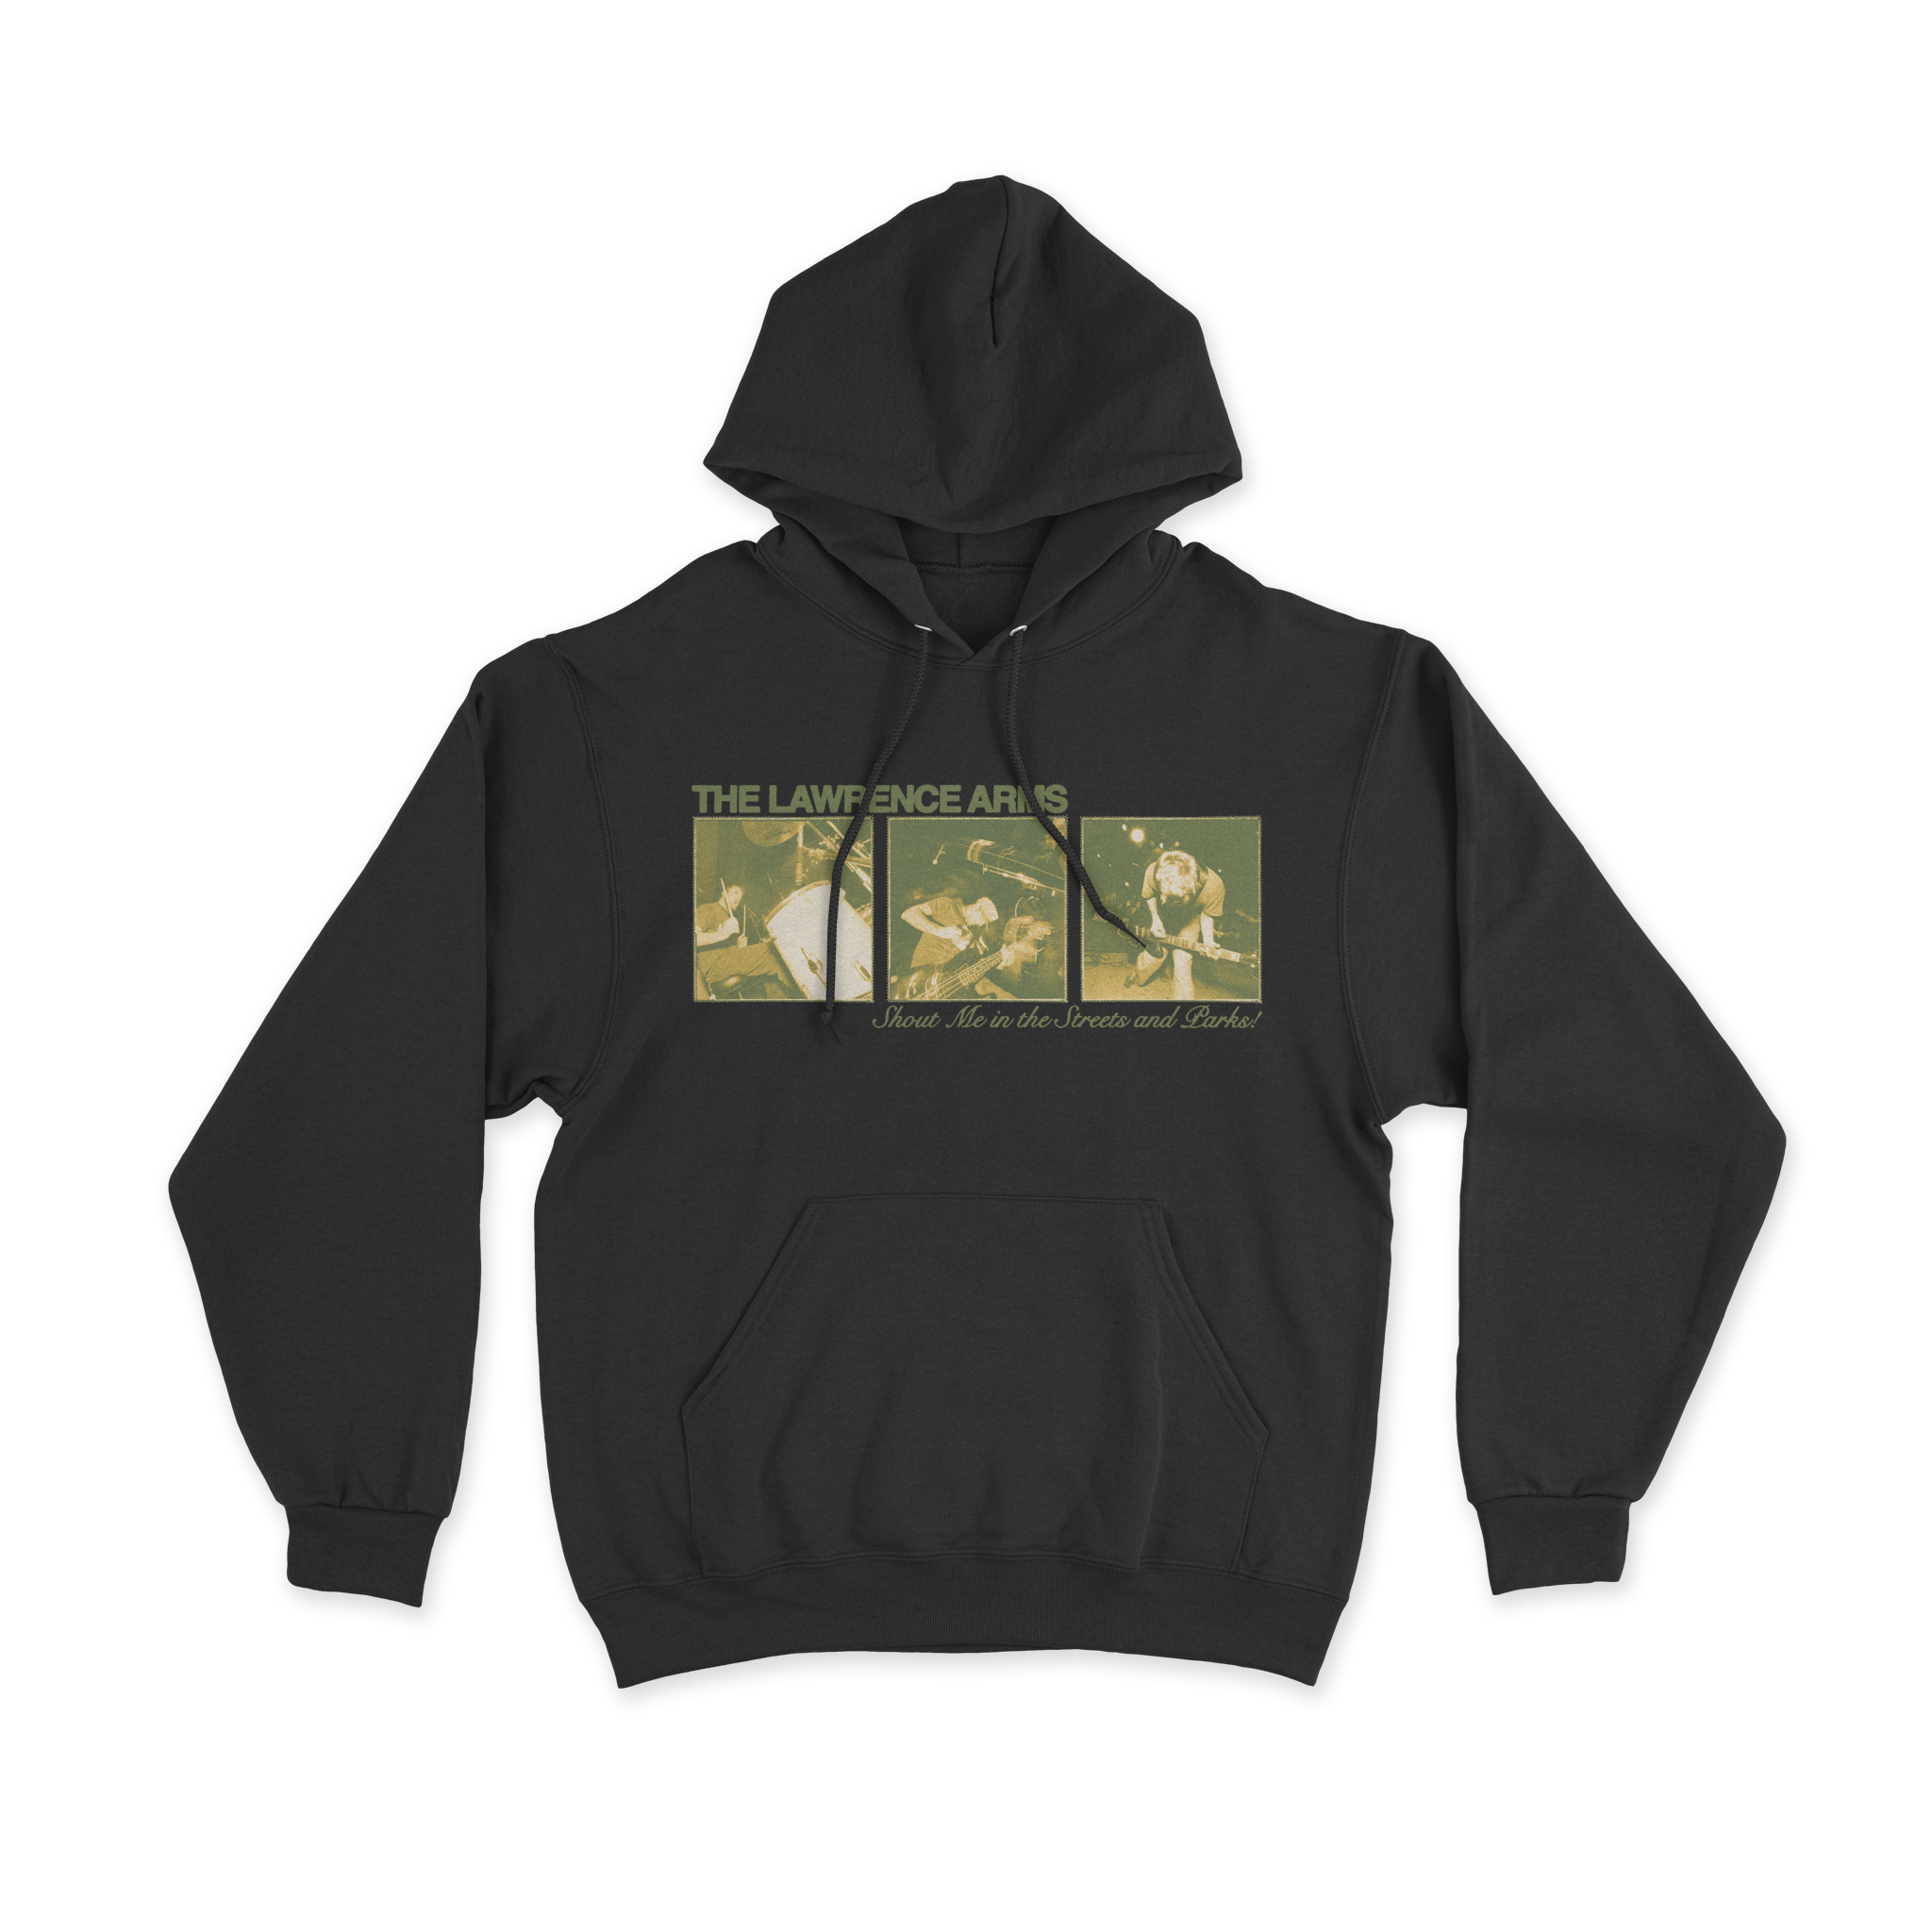 Disaster March Pullover